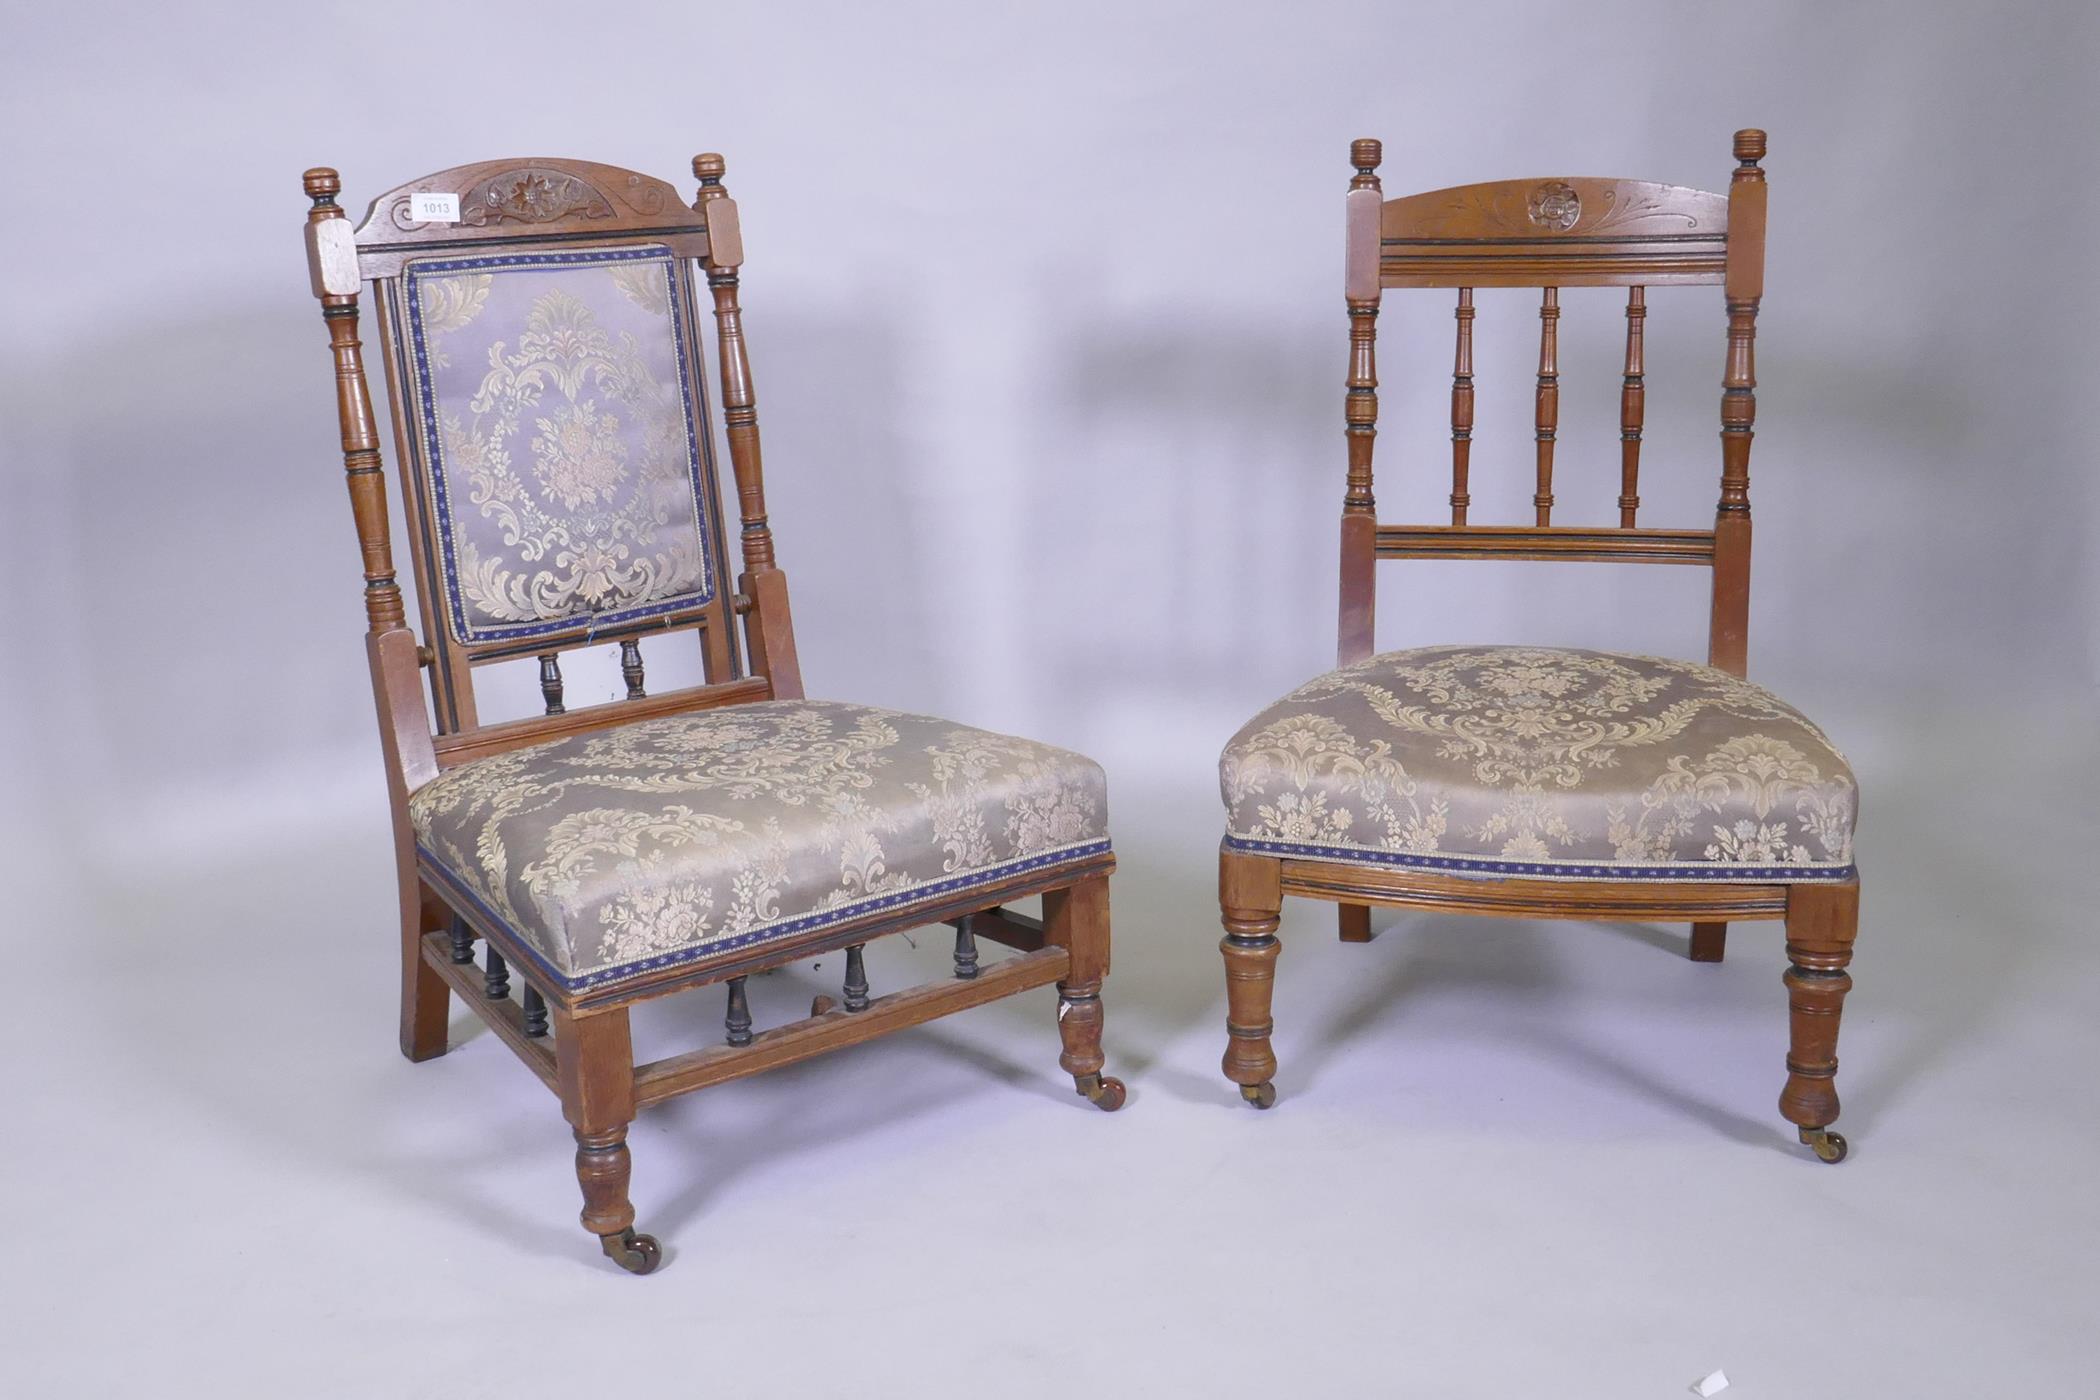 A C19th walnut parlour chair retailed by Gregory & Co, Regent Street, London, and another similar